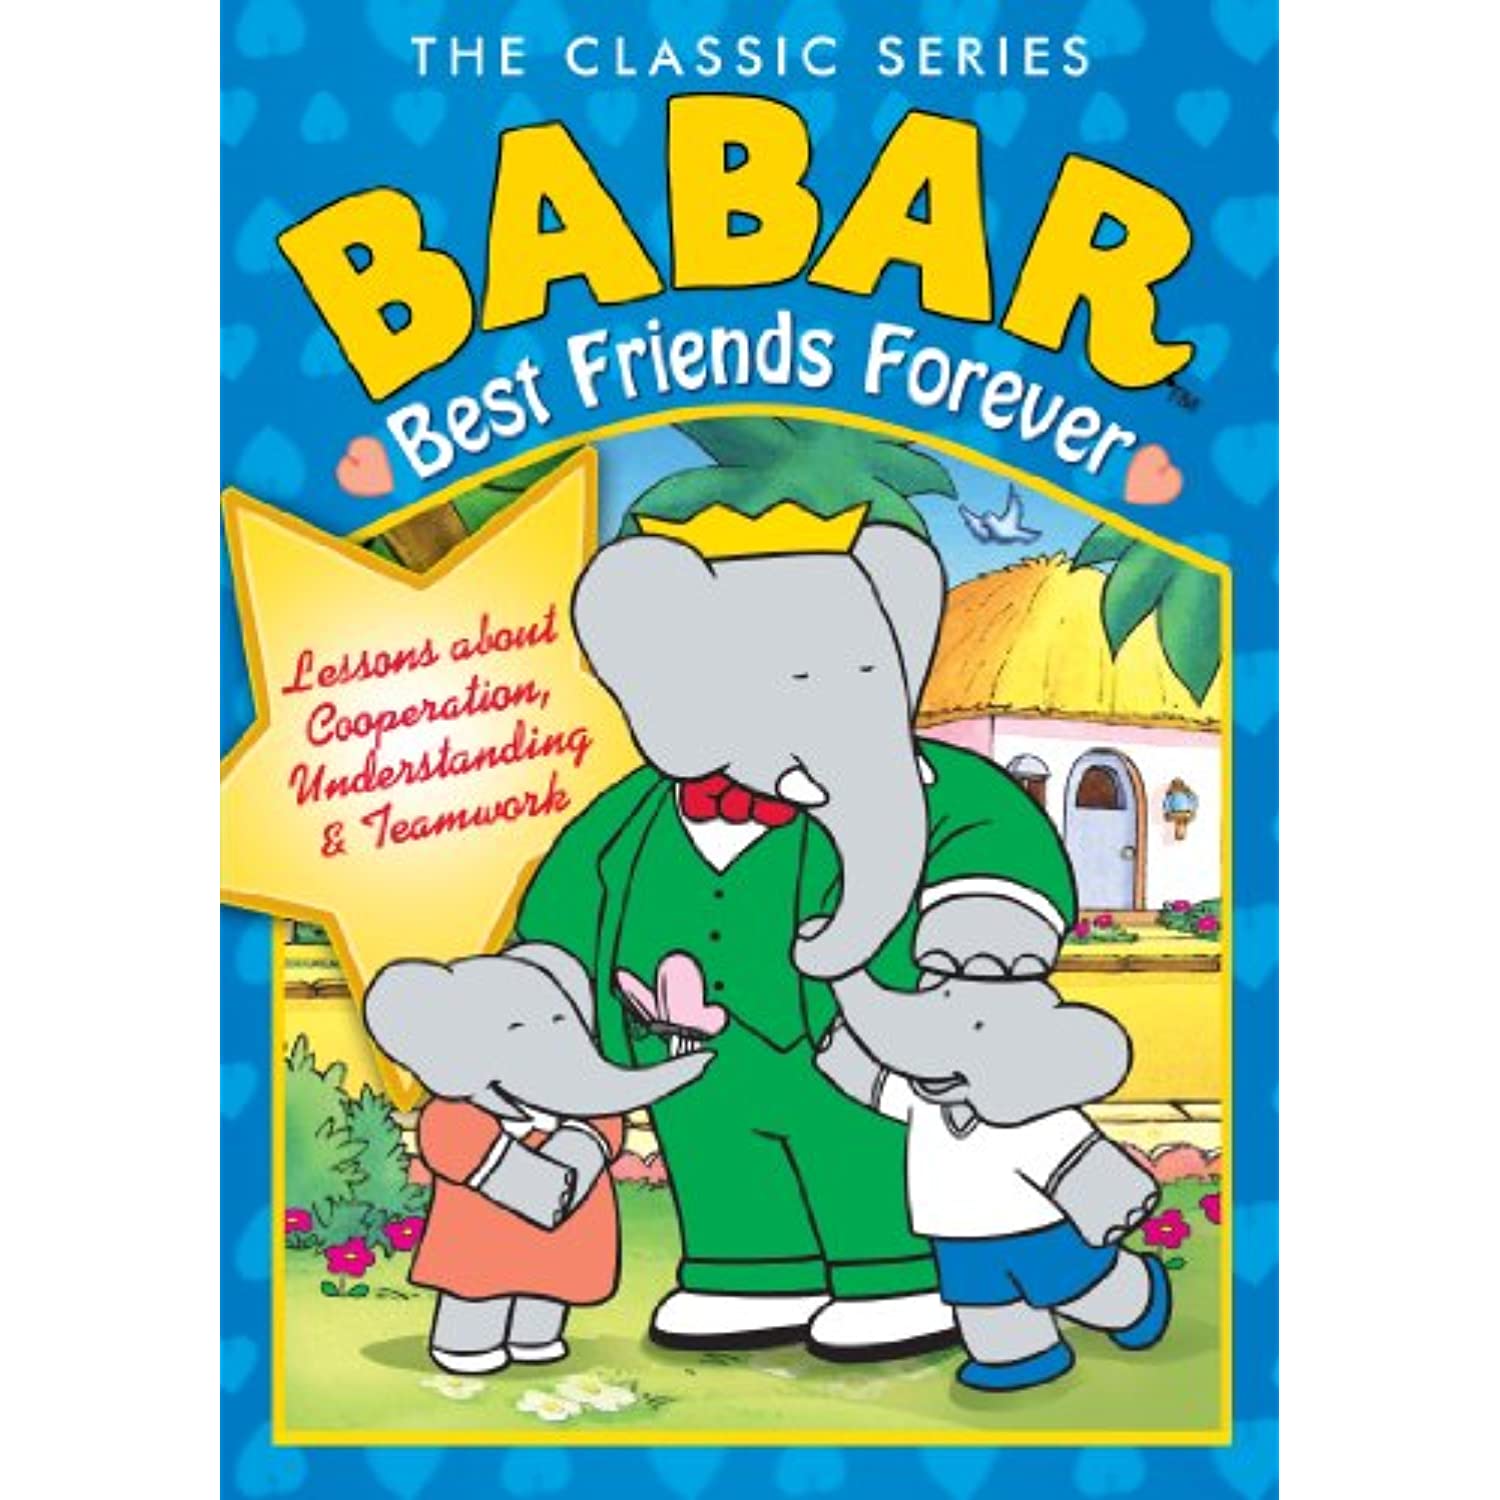 Babar the Classic Series - Best Friends Forever DVD